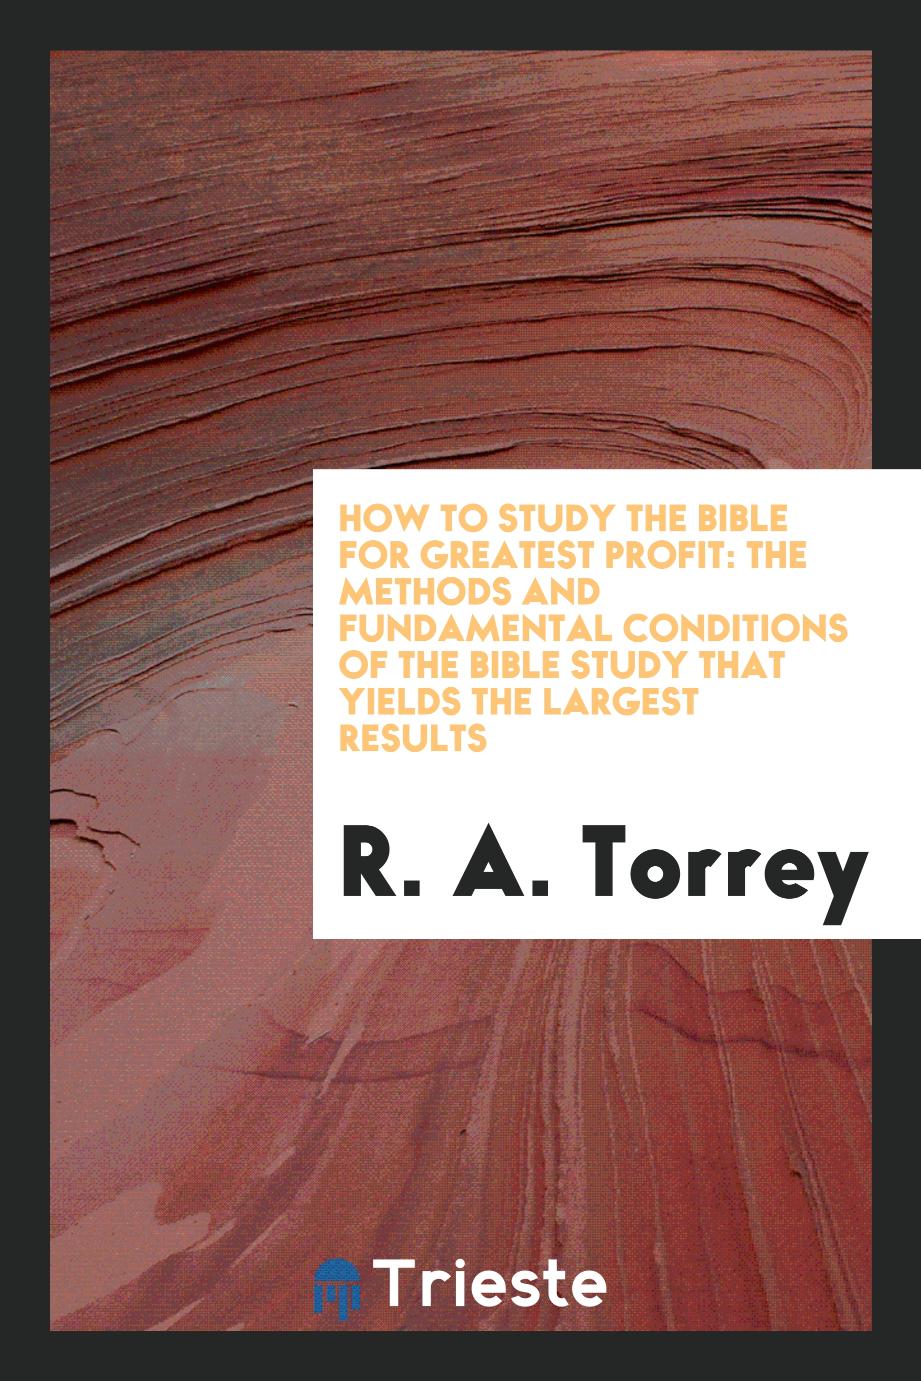 R. A. Torrey - How to Study the Bible for Greatest Profit: The Methods and Fundamental Conditions of the Bible Study That Yields the Largest Results